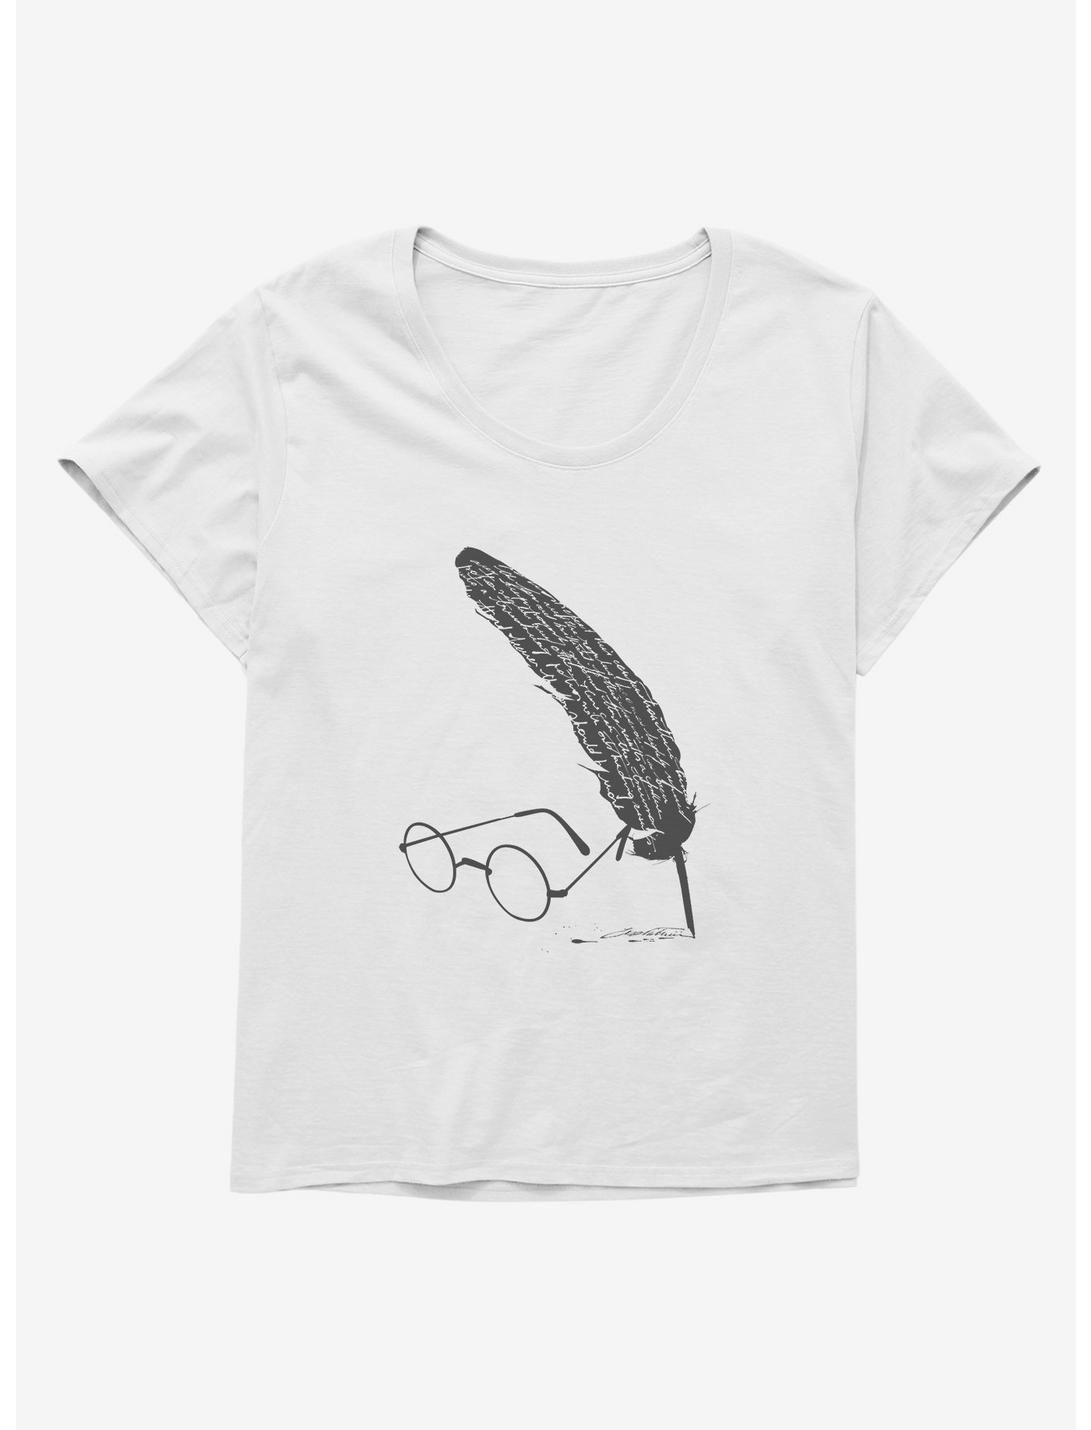 Harry Potter Glasses & Quill Girls T-Shirt Plus Size, , hi-res